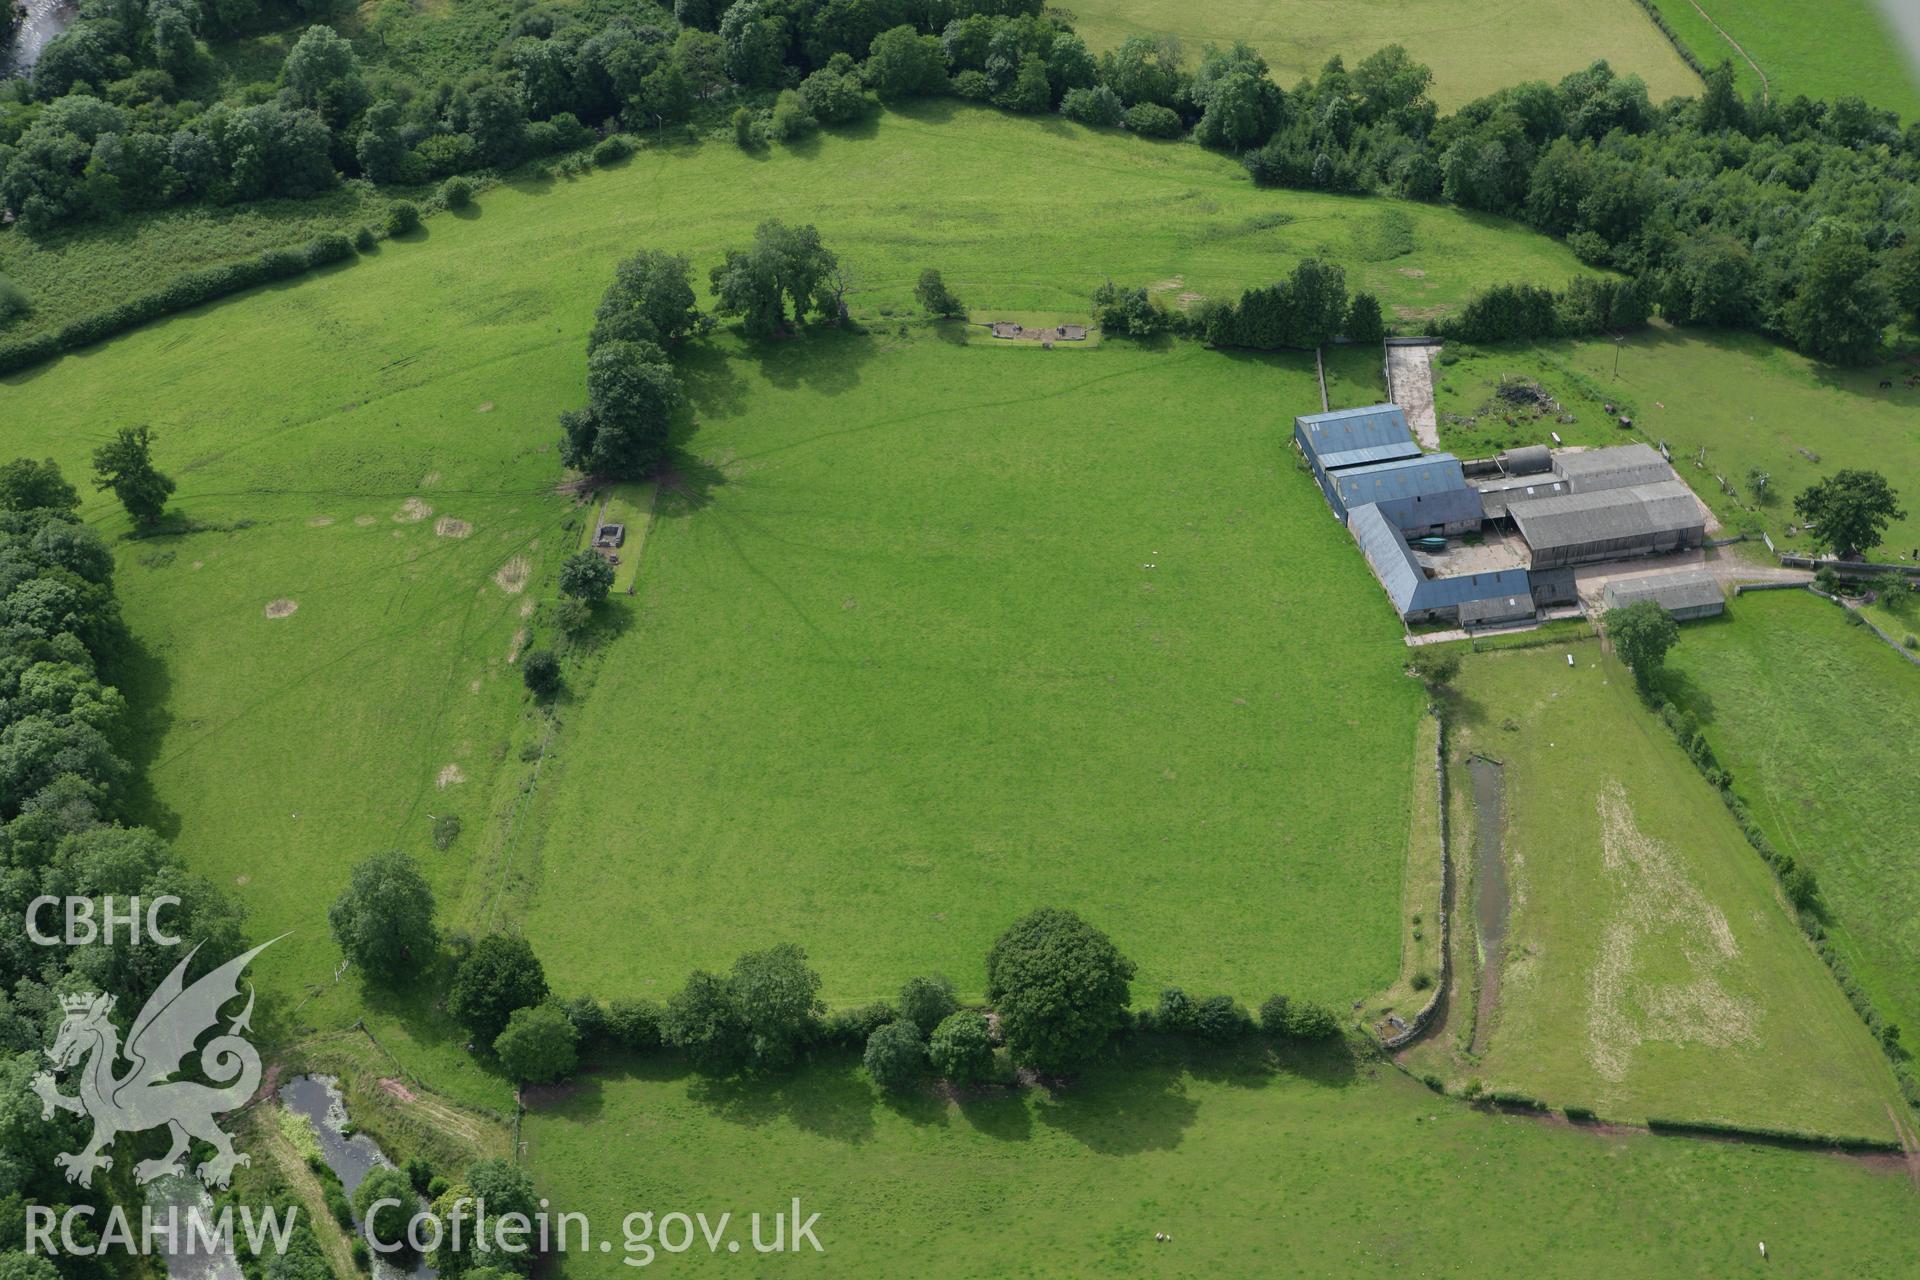 RCAHMW colour oblique aerial photograph of Brecon Gaer. Taken on 09 July 2007 by Toby Driver